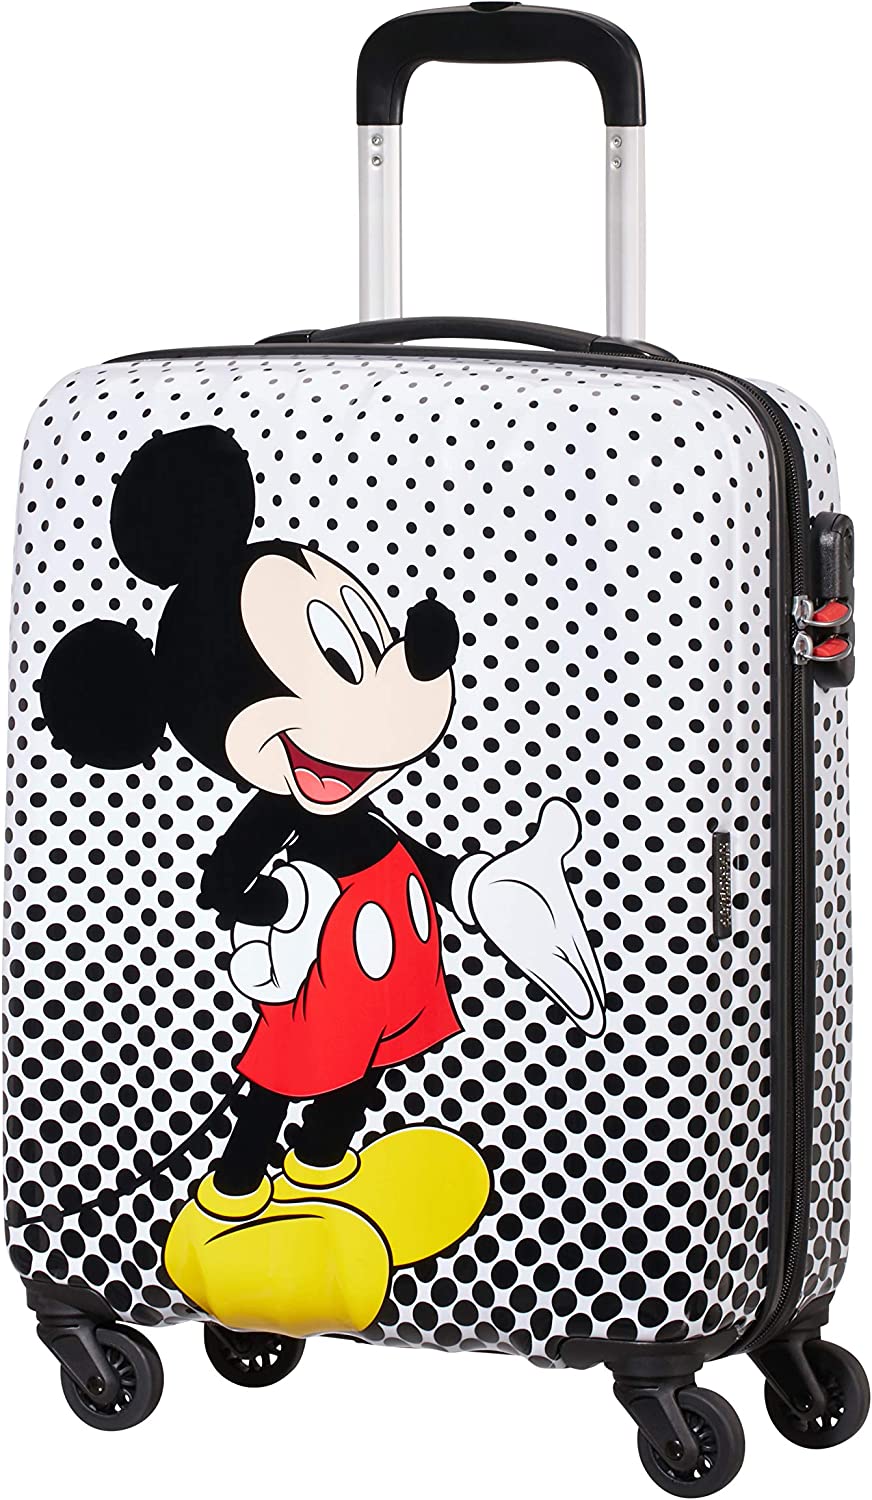 American Tourister Disney Mickey Mouse Hardside Kid’s Luggage